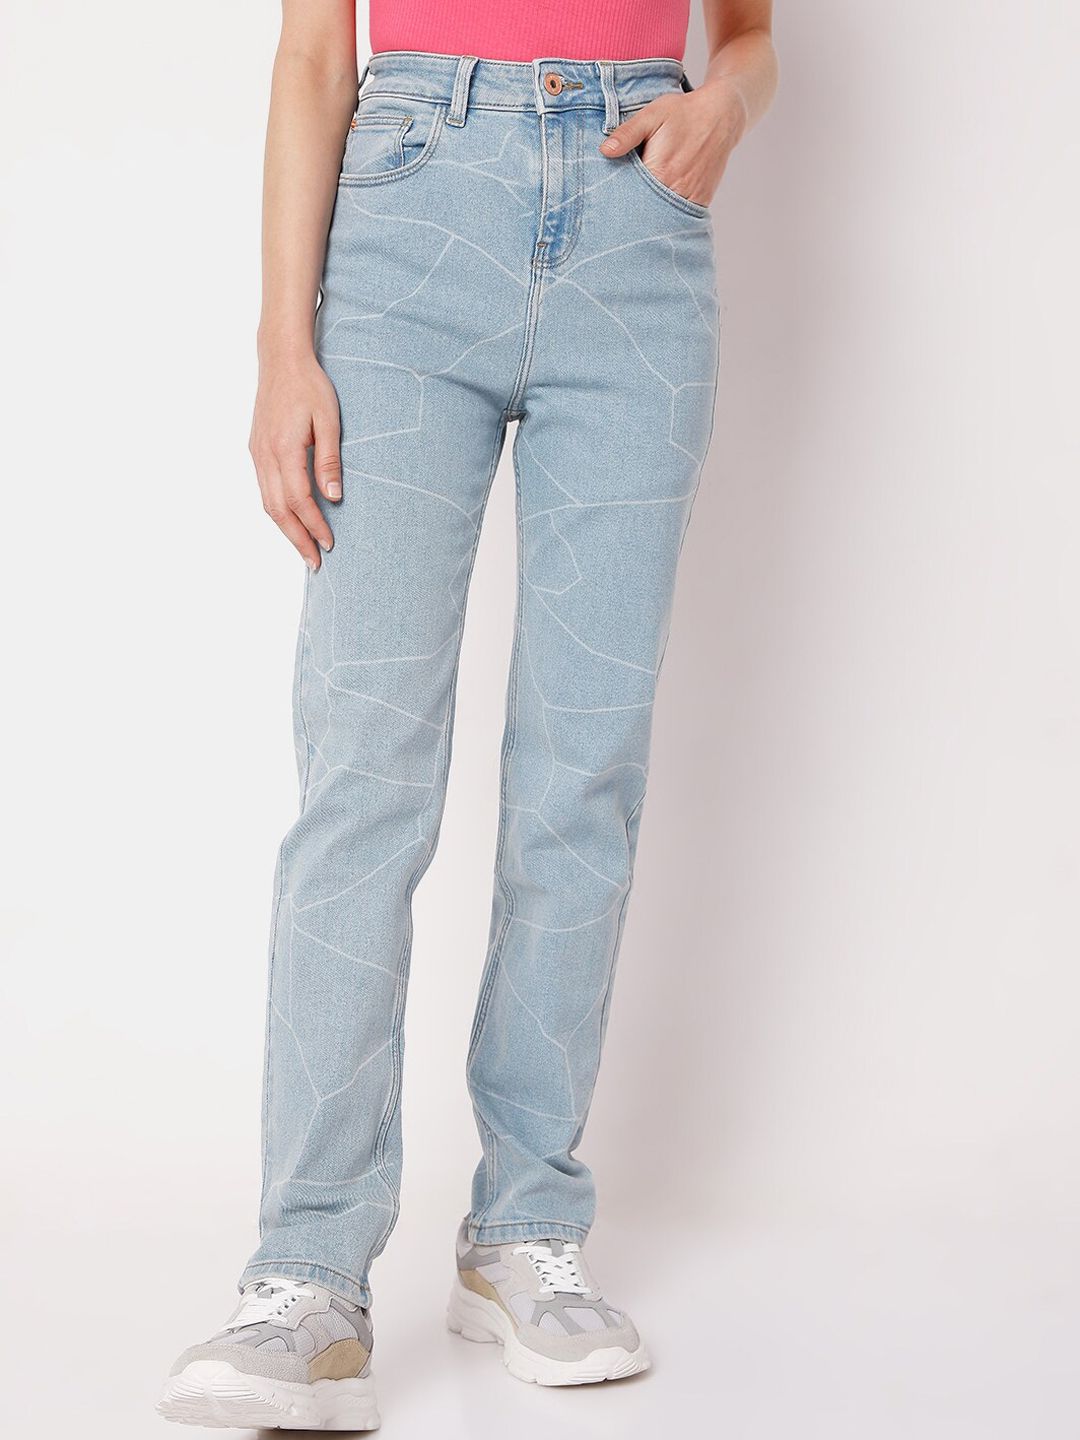 Vero Moda Women Blue High-Rise Light Fade Printed Stretchable Jeans Price in India